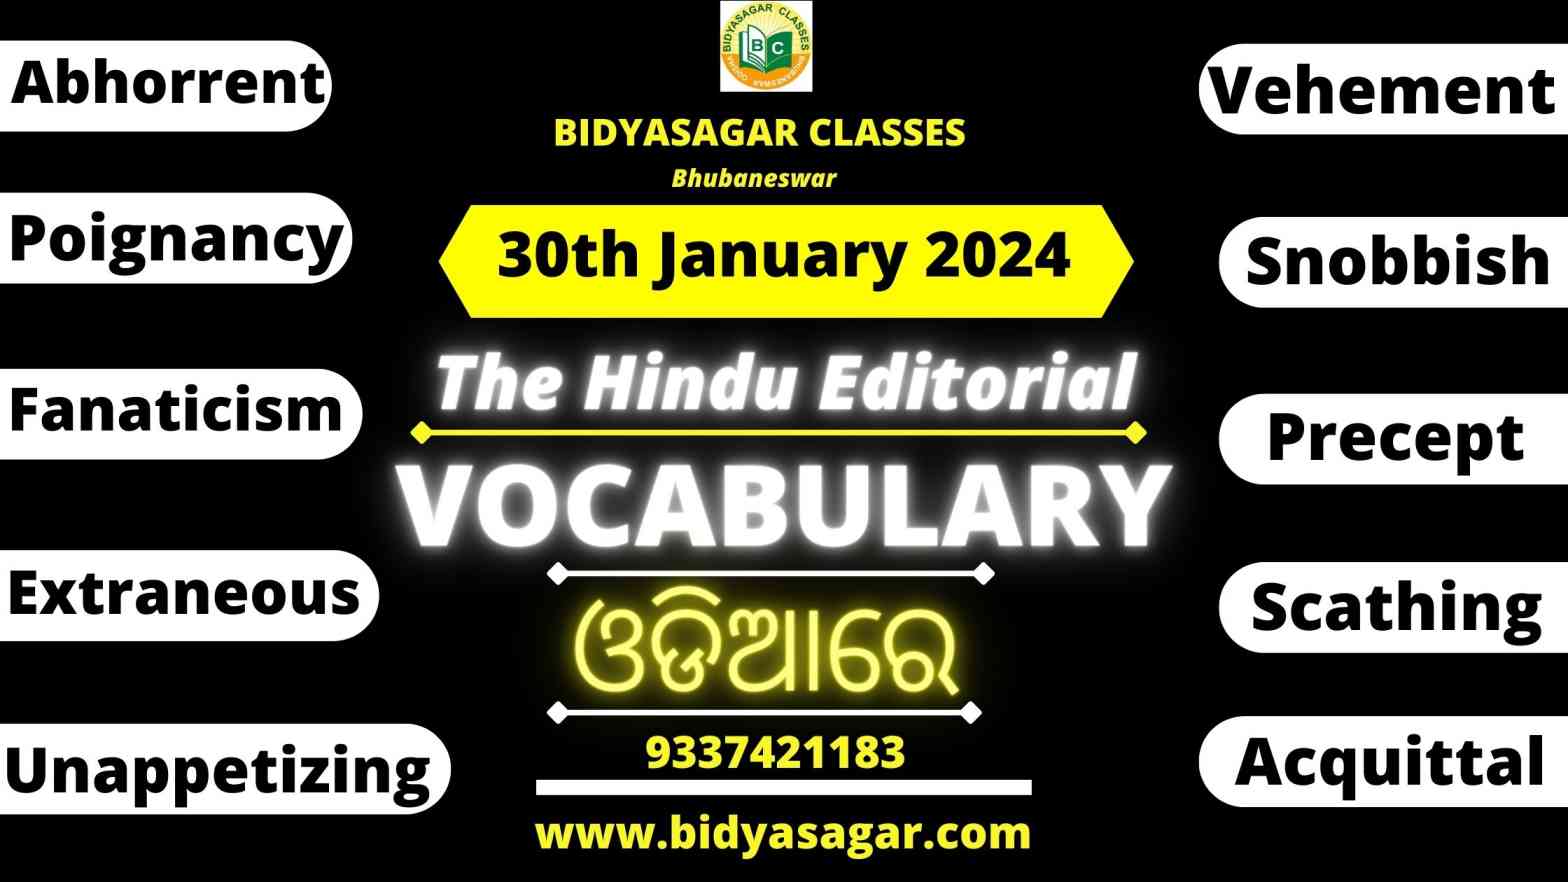 The Hindu Editorial Vocabulary of 30th January 2024